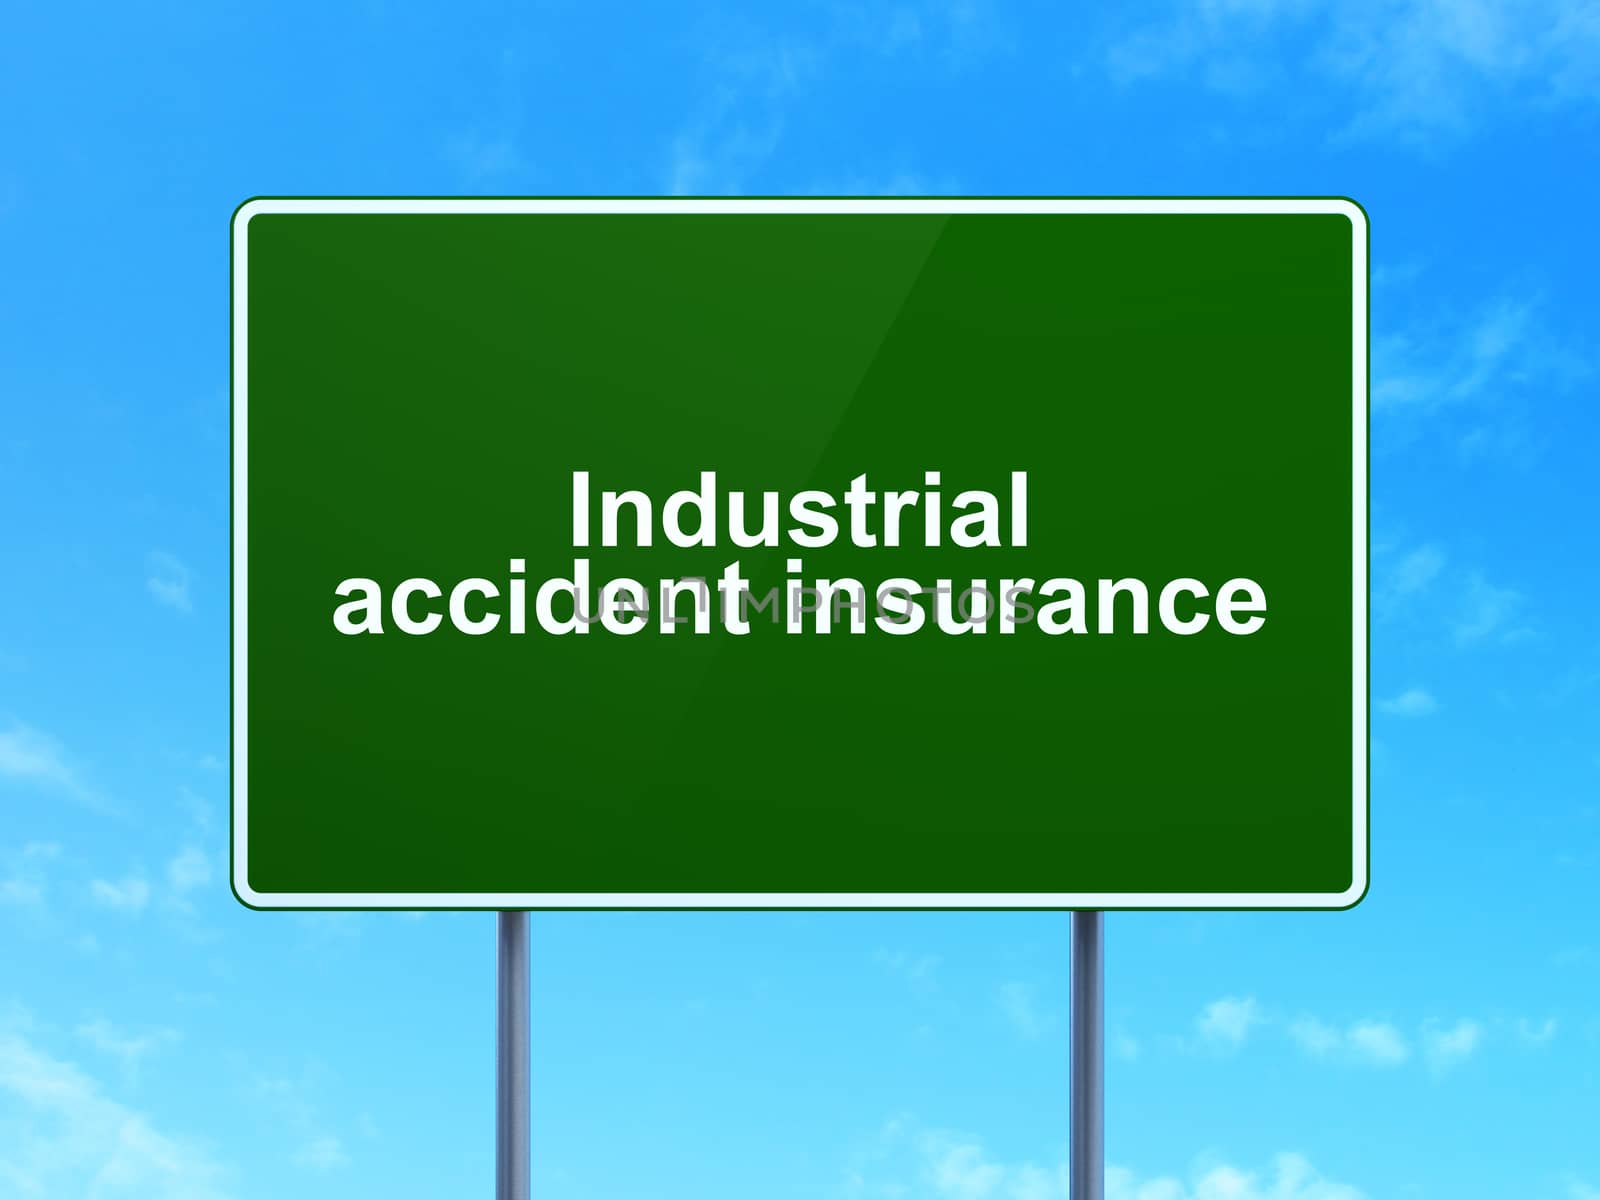 Insurance concept: Industrial Accident Insurance on green road highway sign, clear blue sky background, 3D rendering